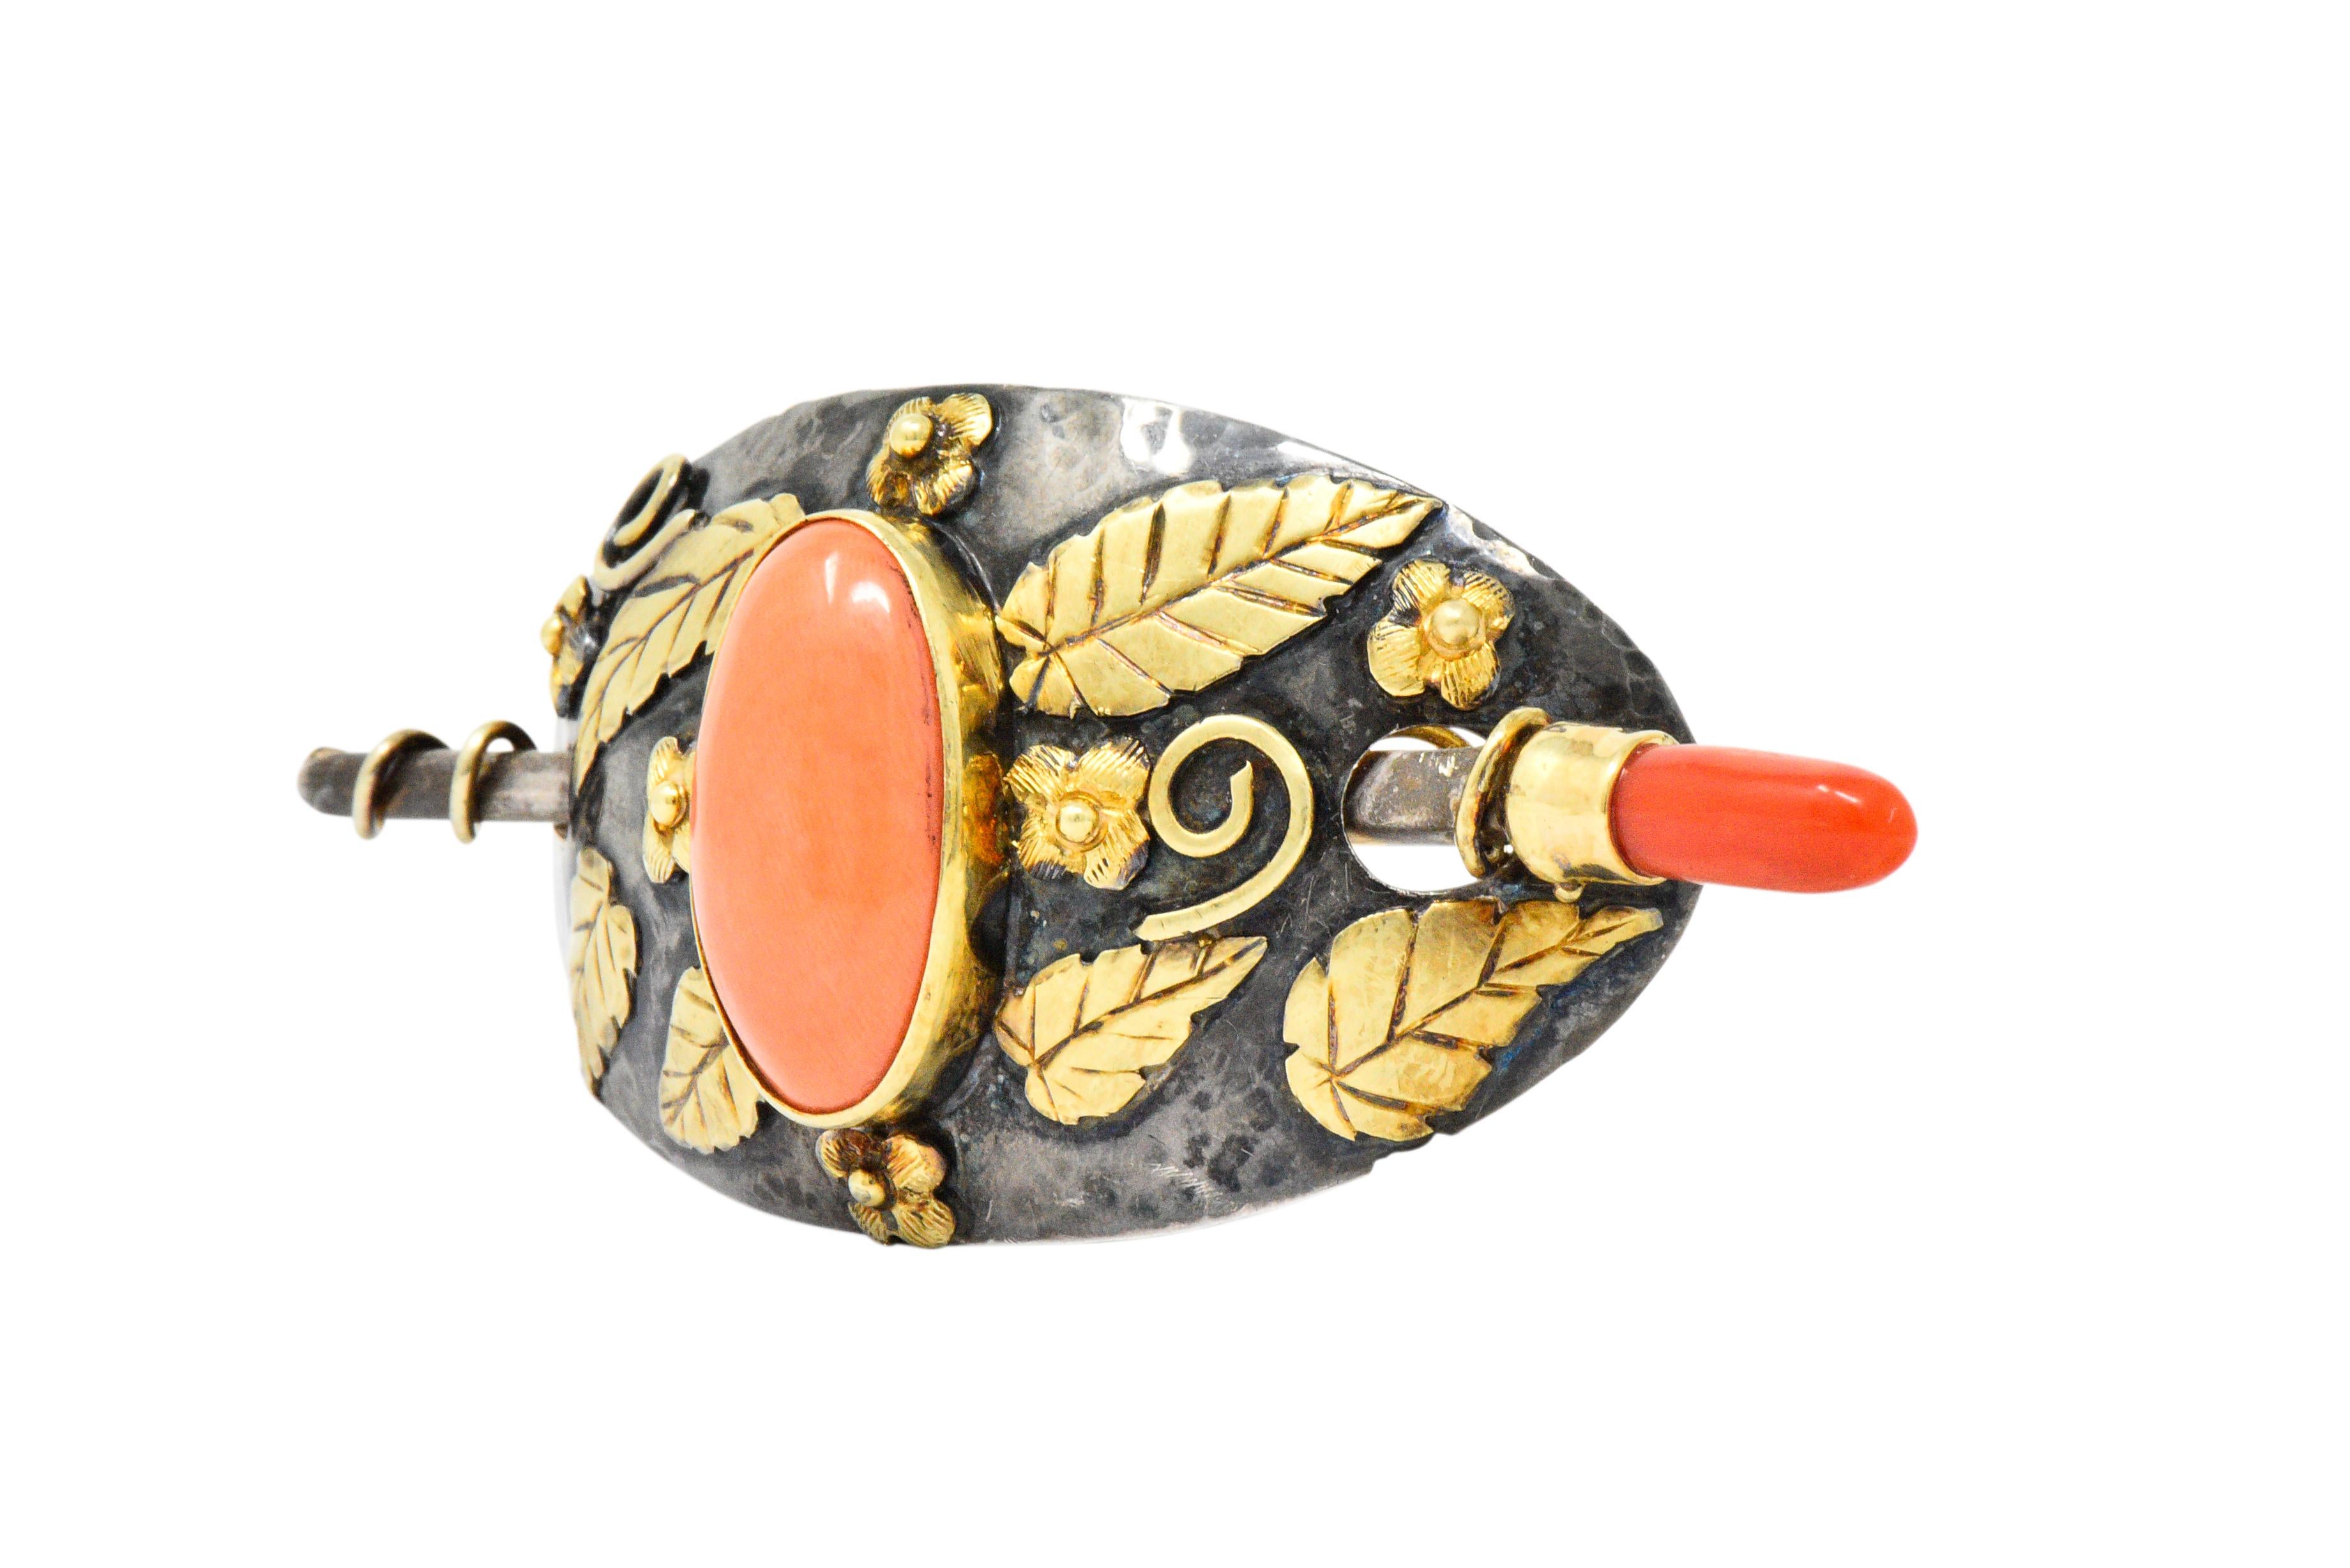 Originally a hair pin that has been converted to a brooch

Designed as a large oval comprised of hammered silver with floral and foliate gold appliqué

Centering an oval coral cabochon measuring approximately 23.7 x 13.0 mm

Bezel set in gold with